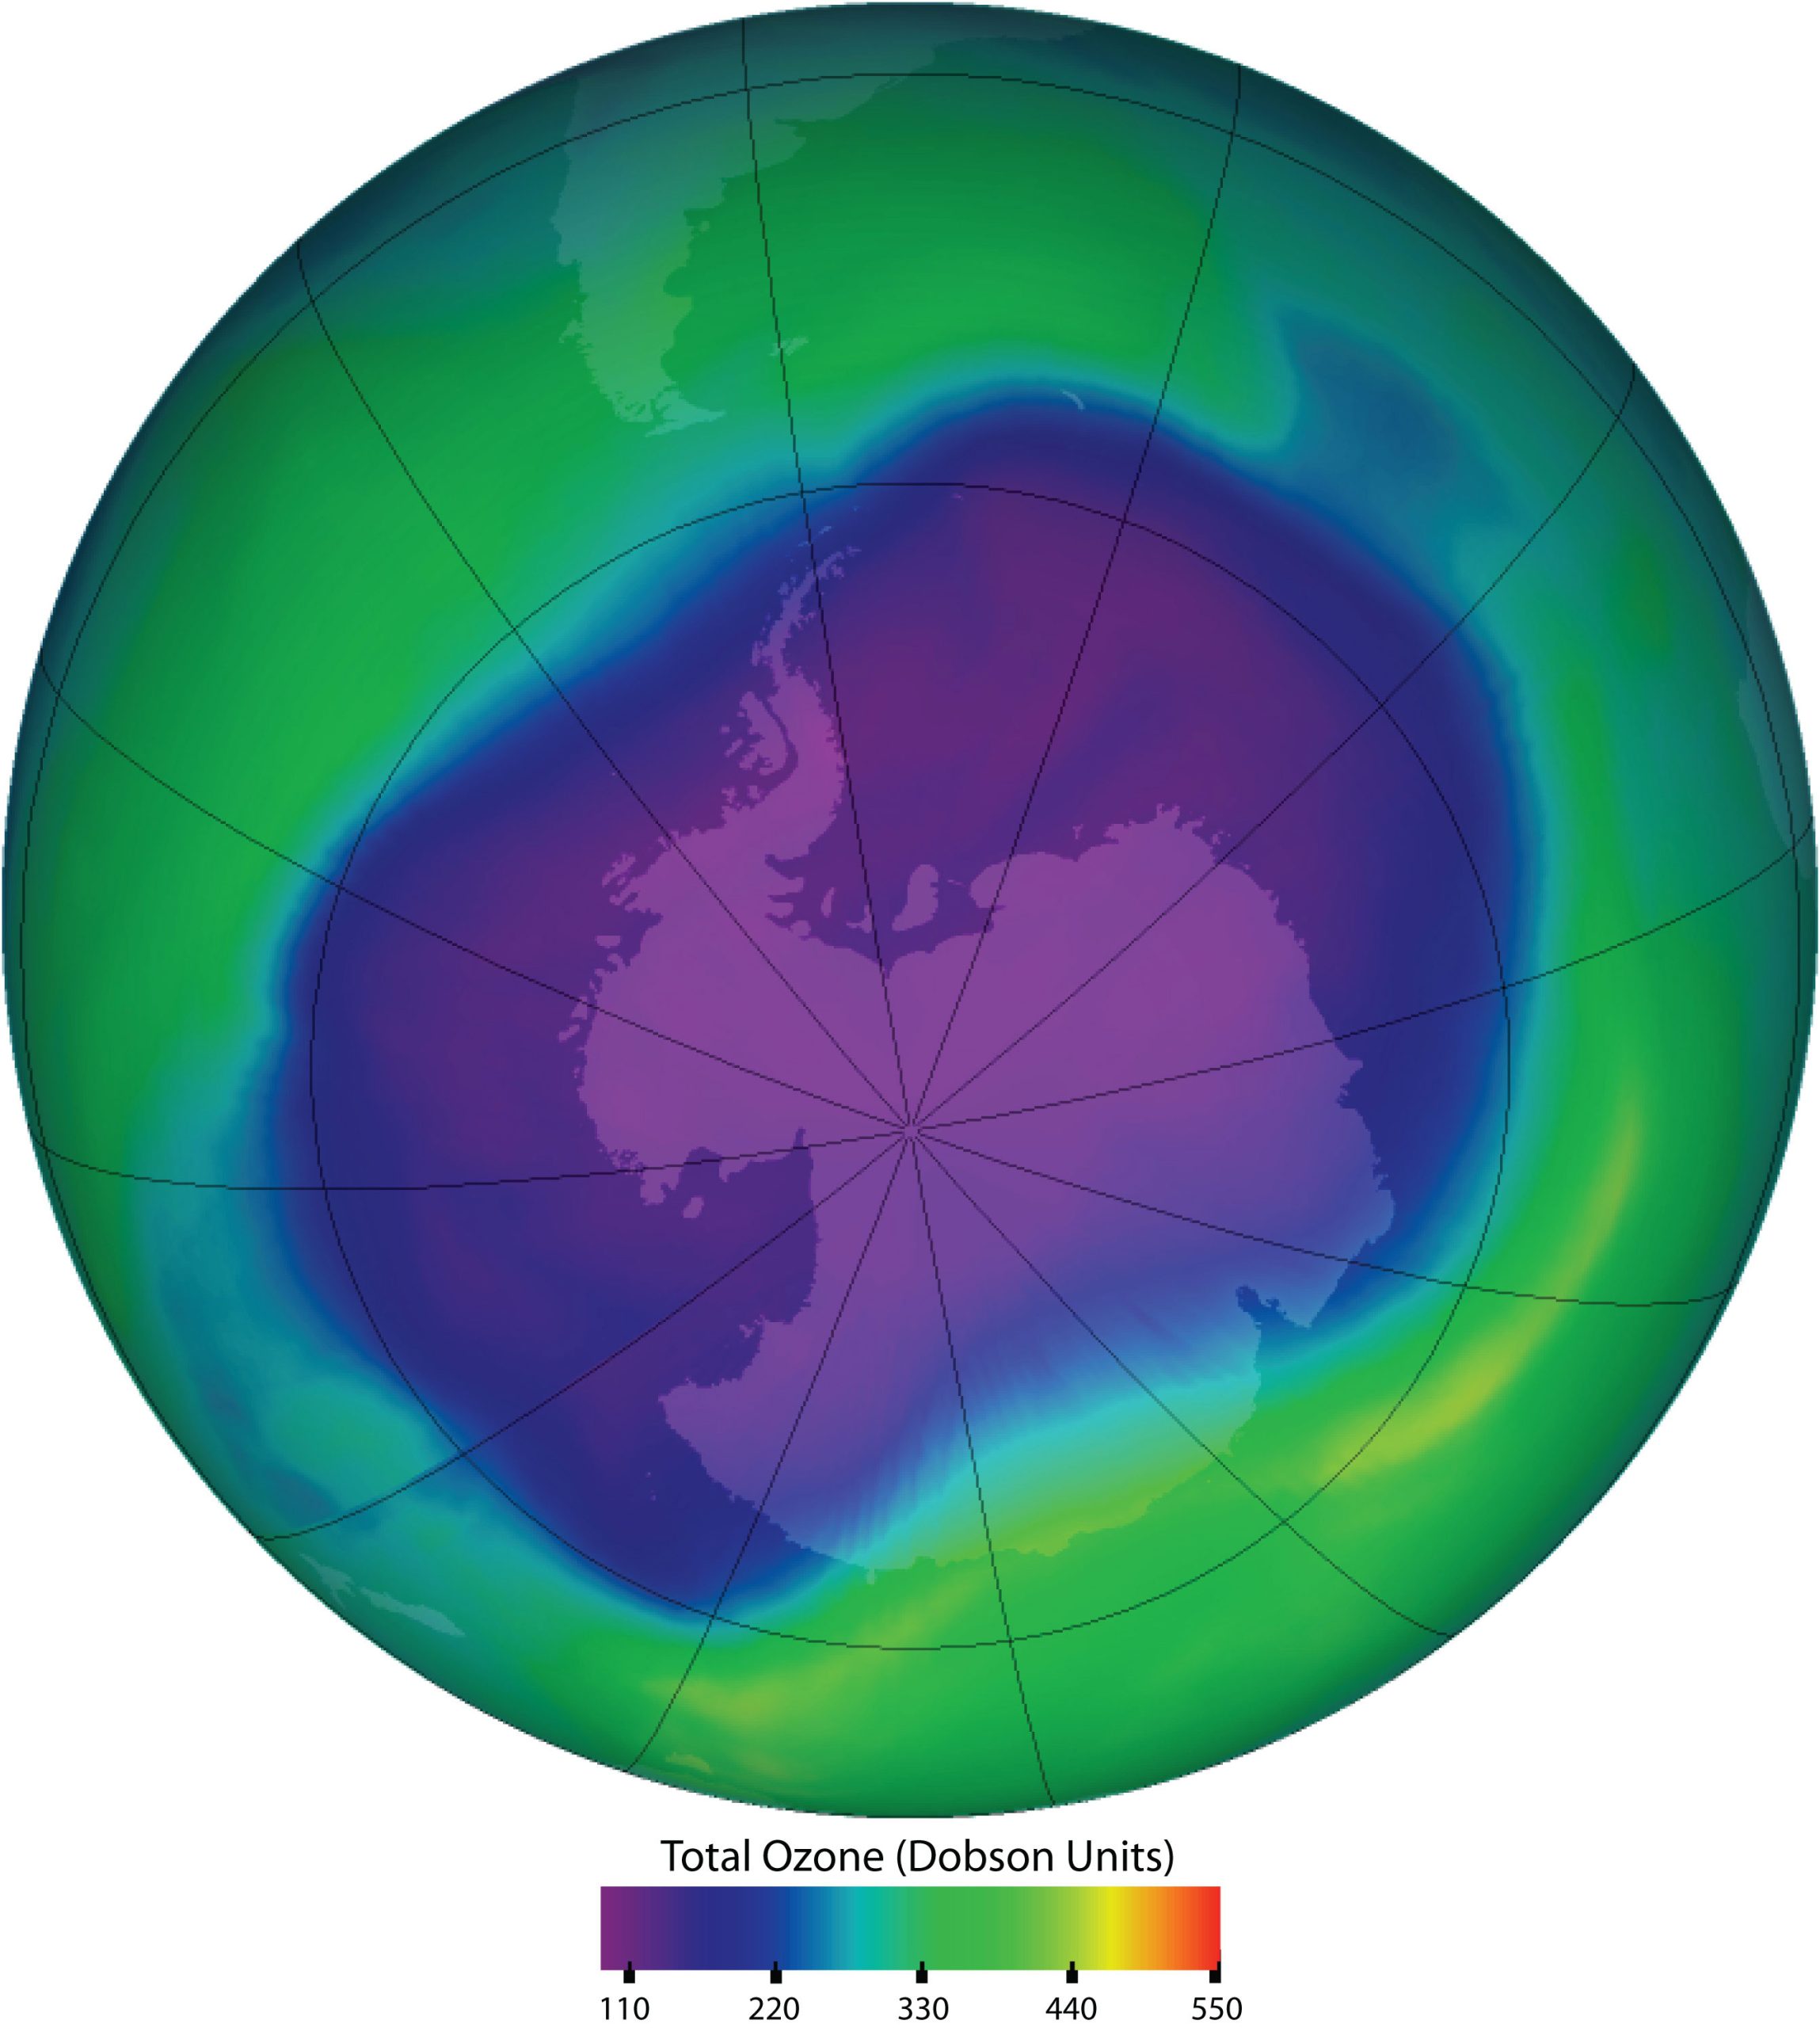 A blue/purple outline covering the aerial view of the earth that shows ozone covering most of South America.